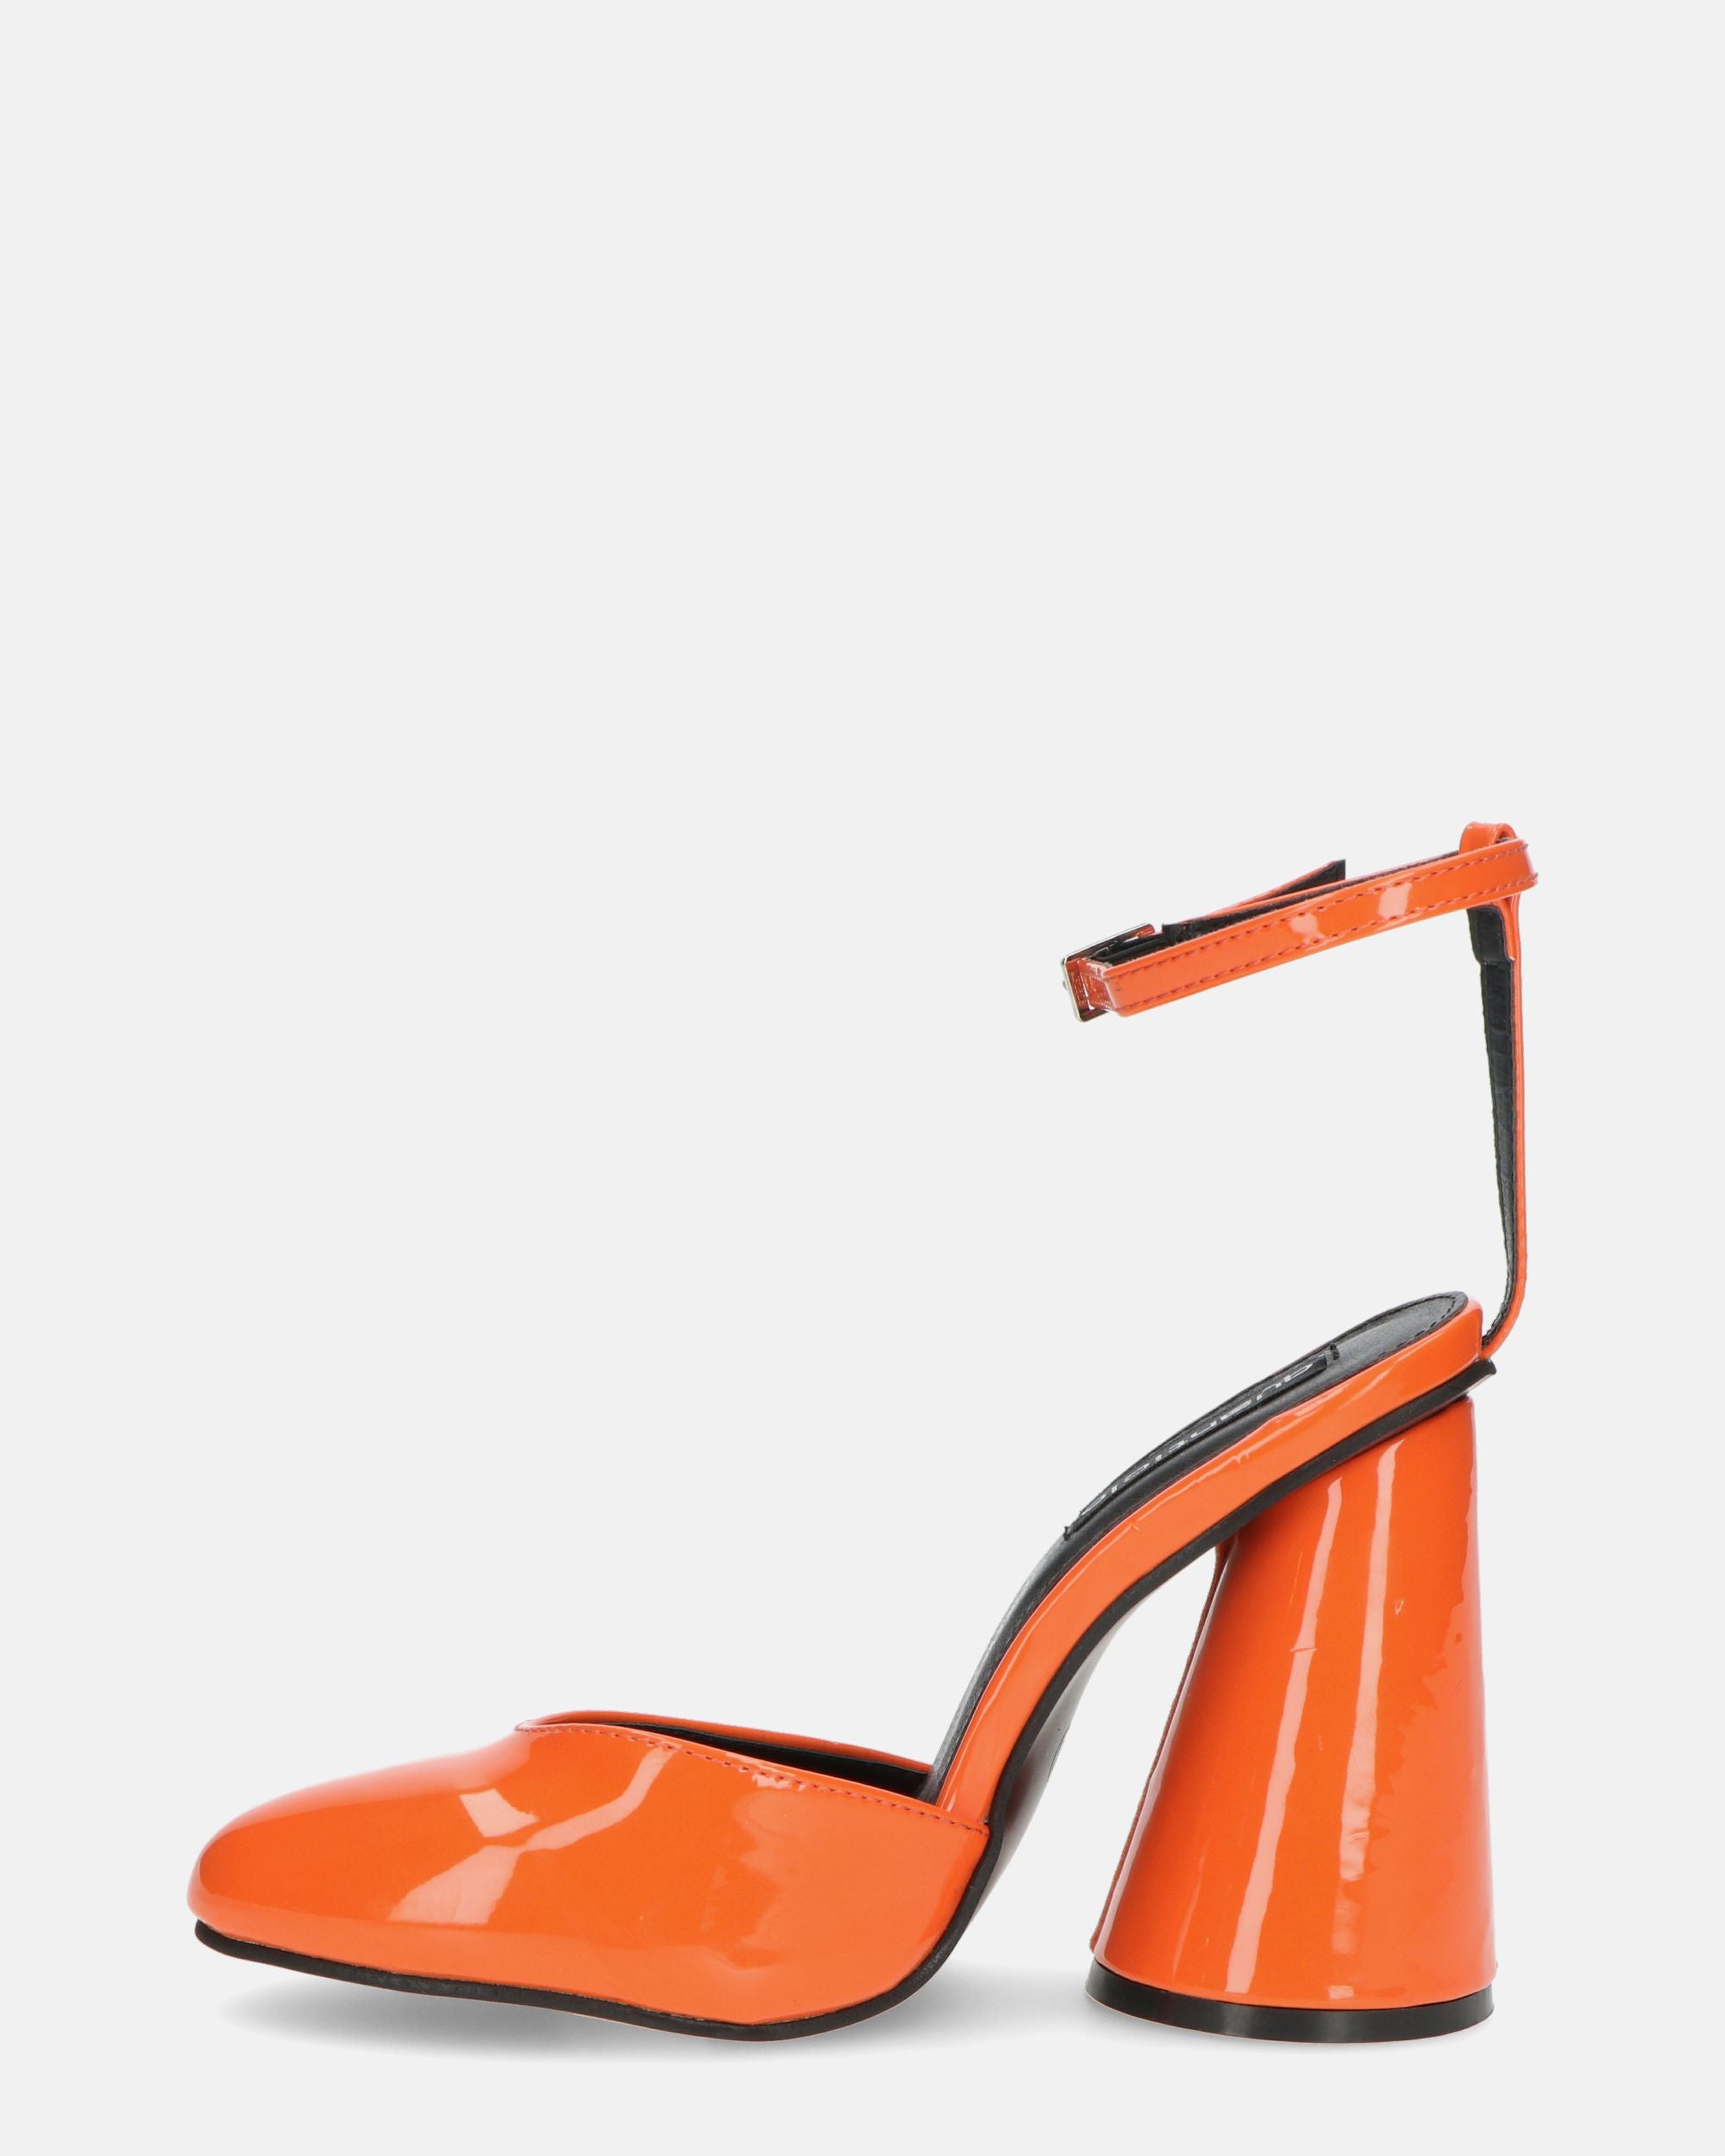 MAYBELLE - orange glassy sandals with cylindrical heel